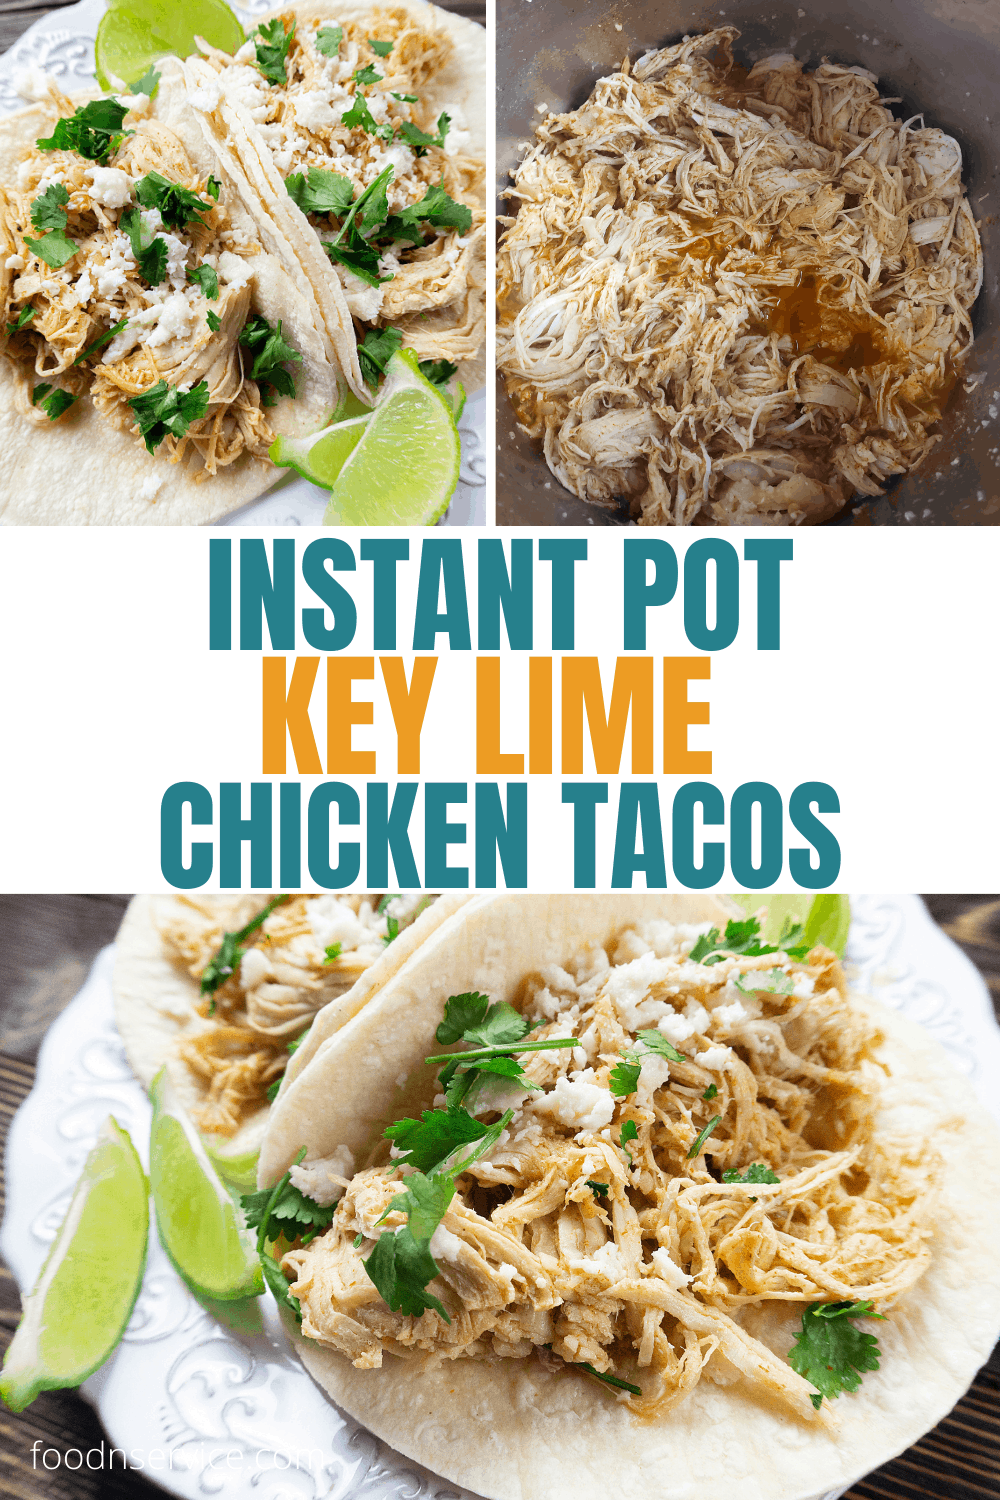 Instant Pot Key Lime Chicken Tacos